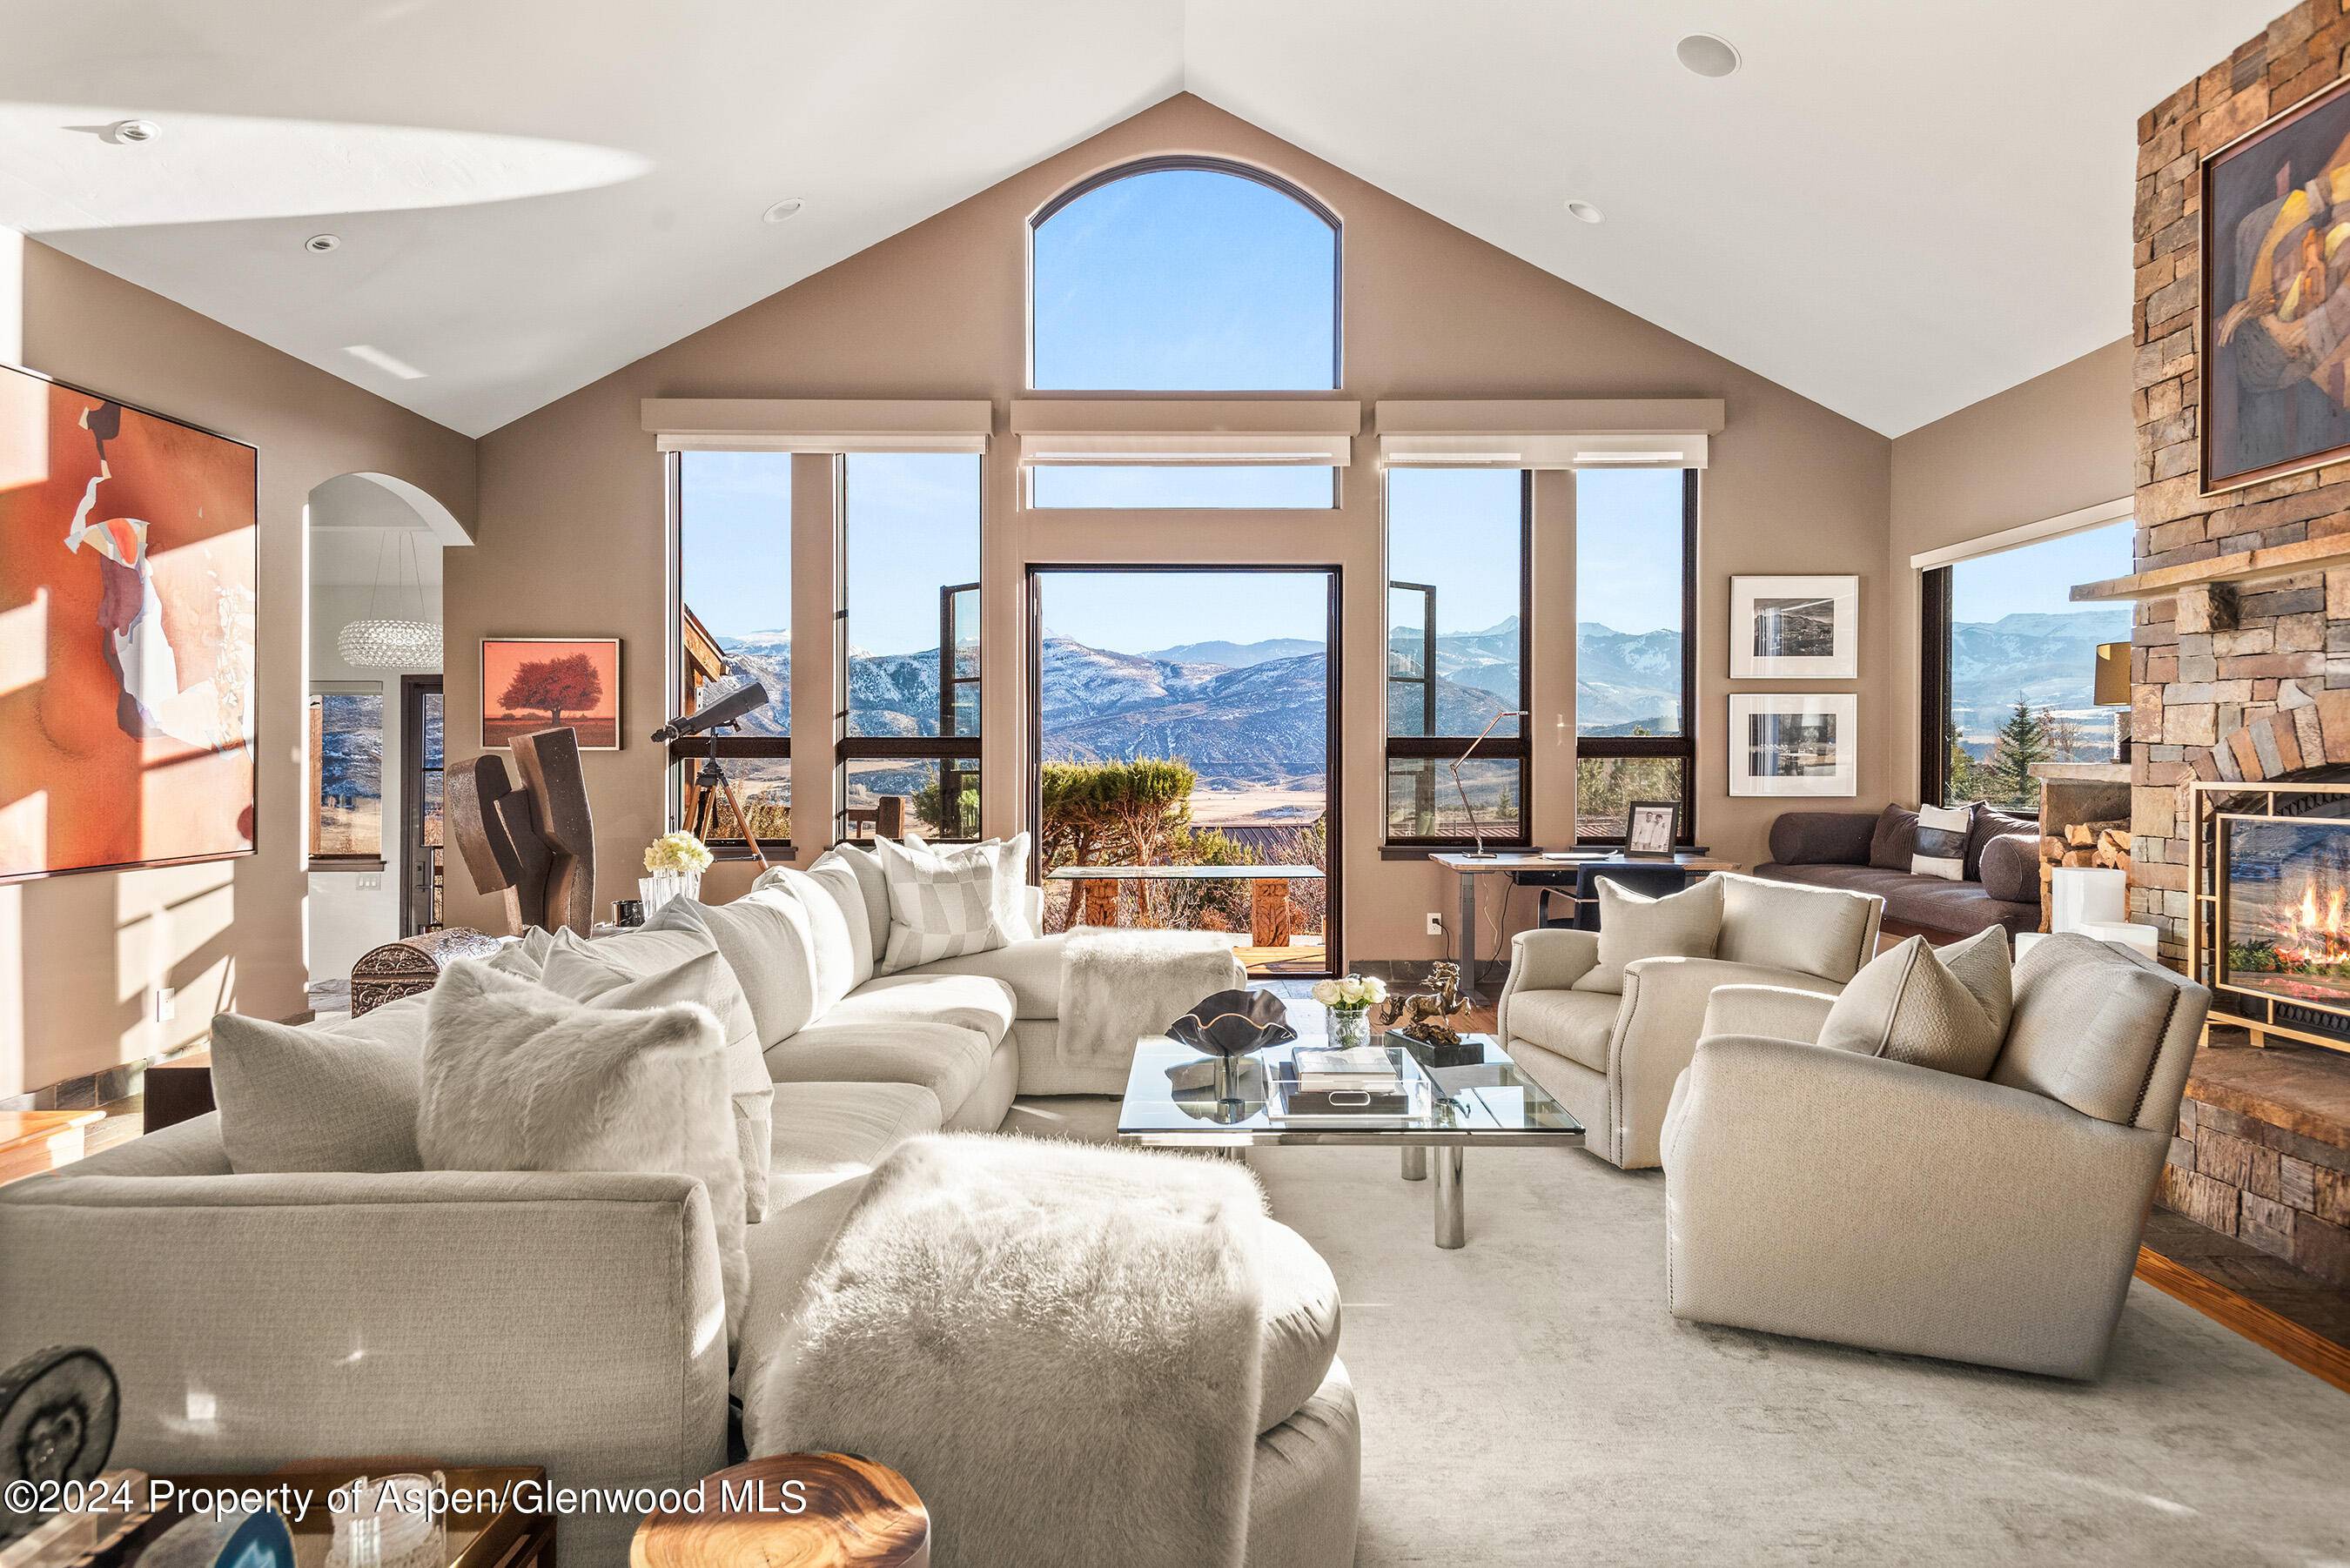 Look out at expansive views of snowcapped peaks and the entire Snowmass Creek Valley from this home's commanding perch in Old Snowmass.